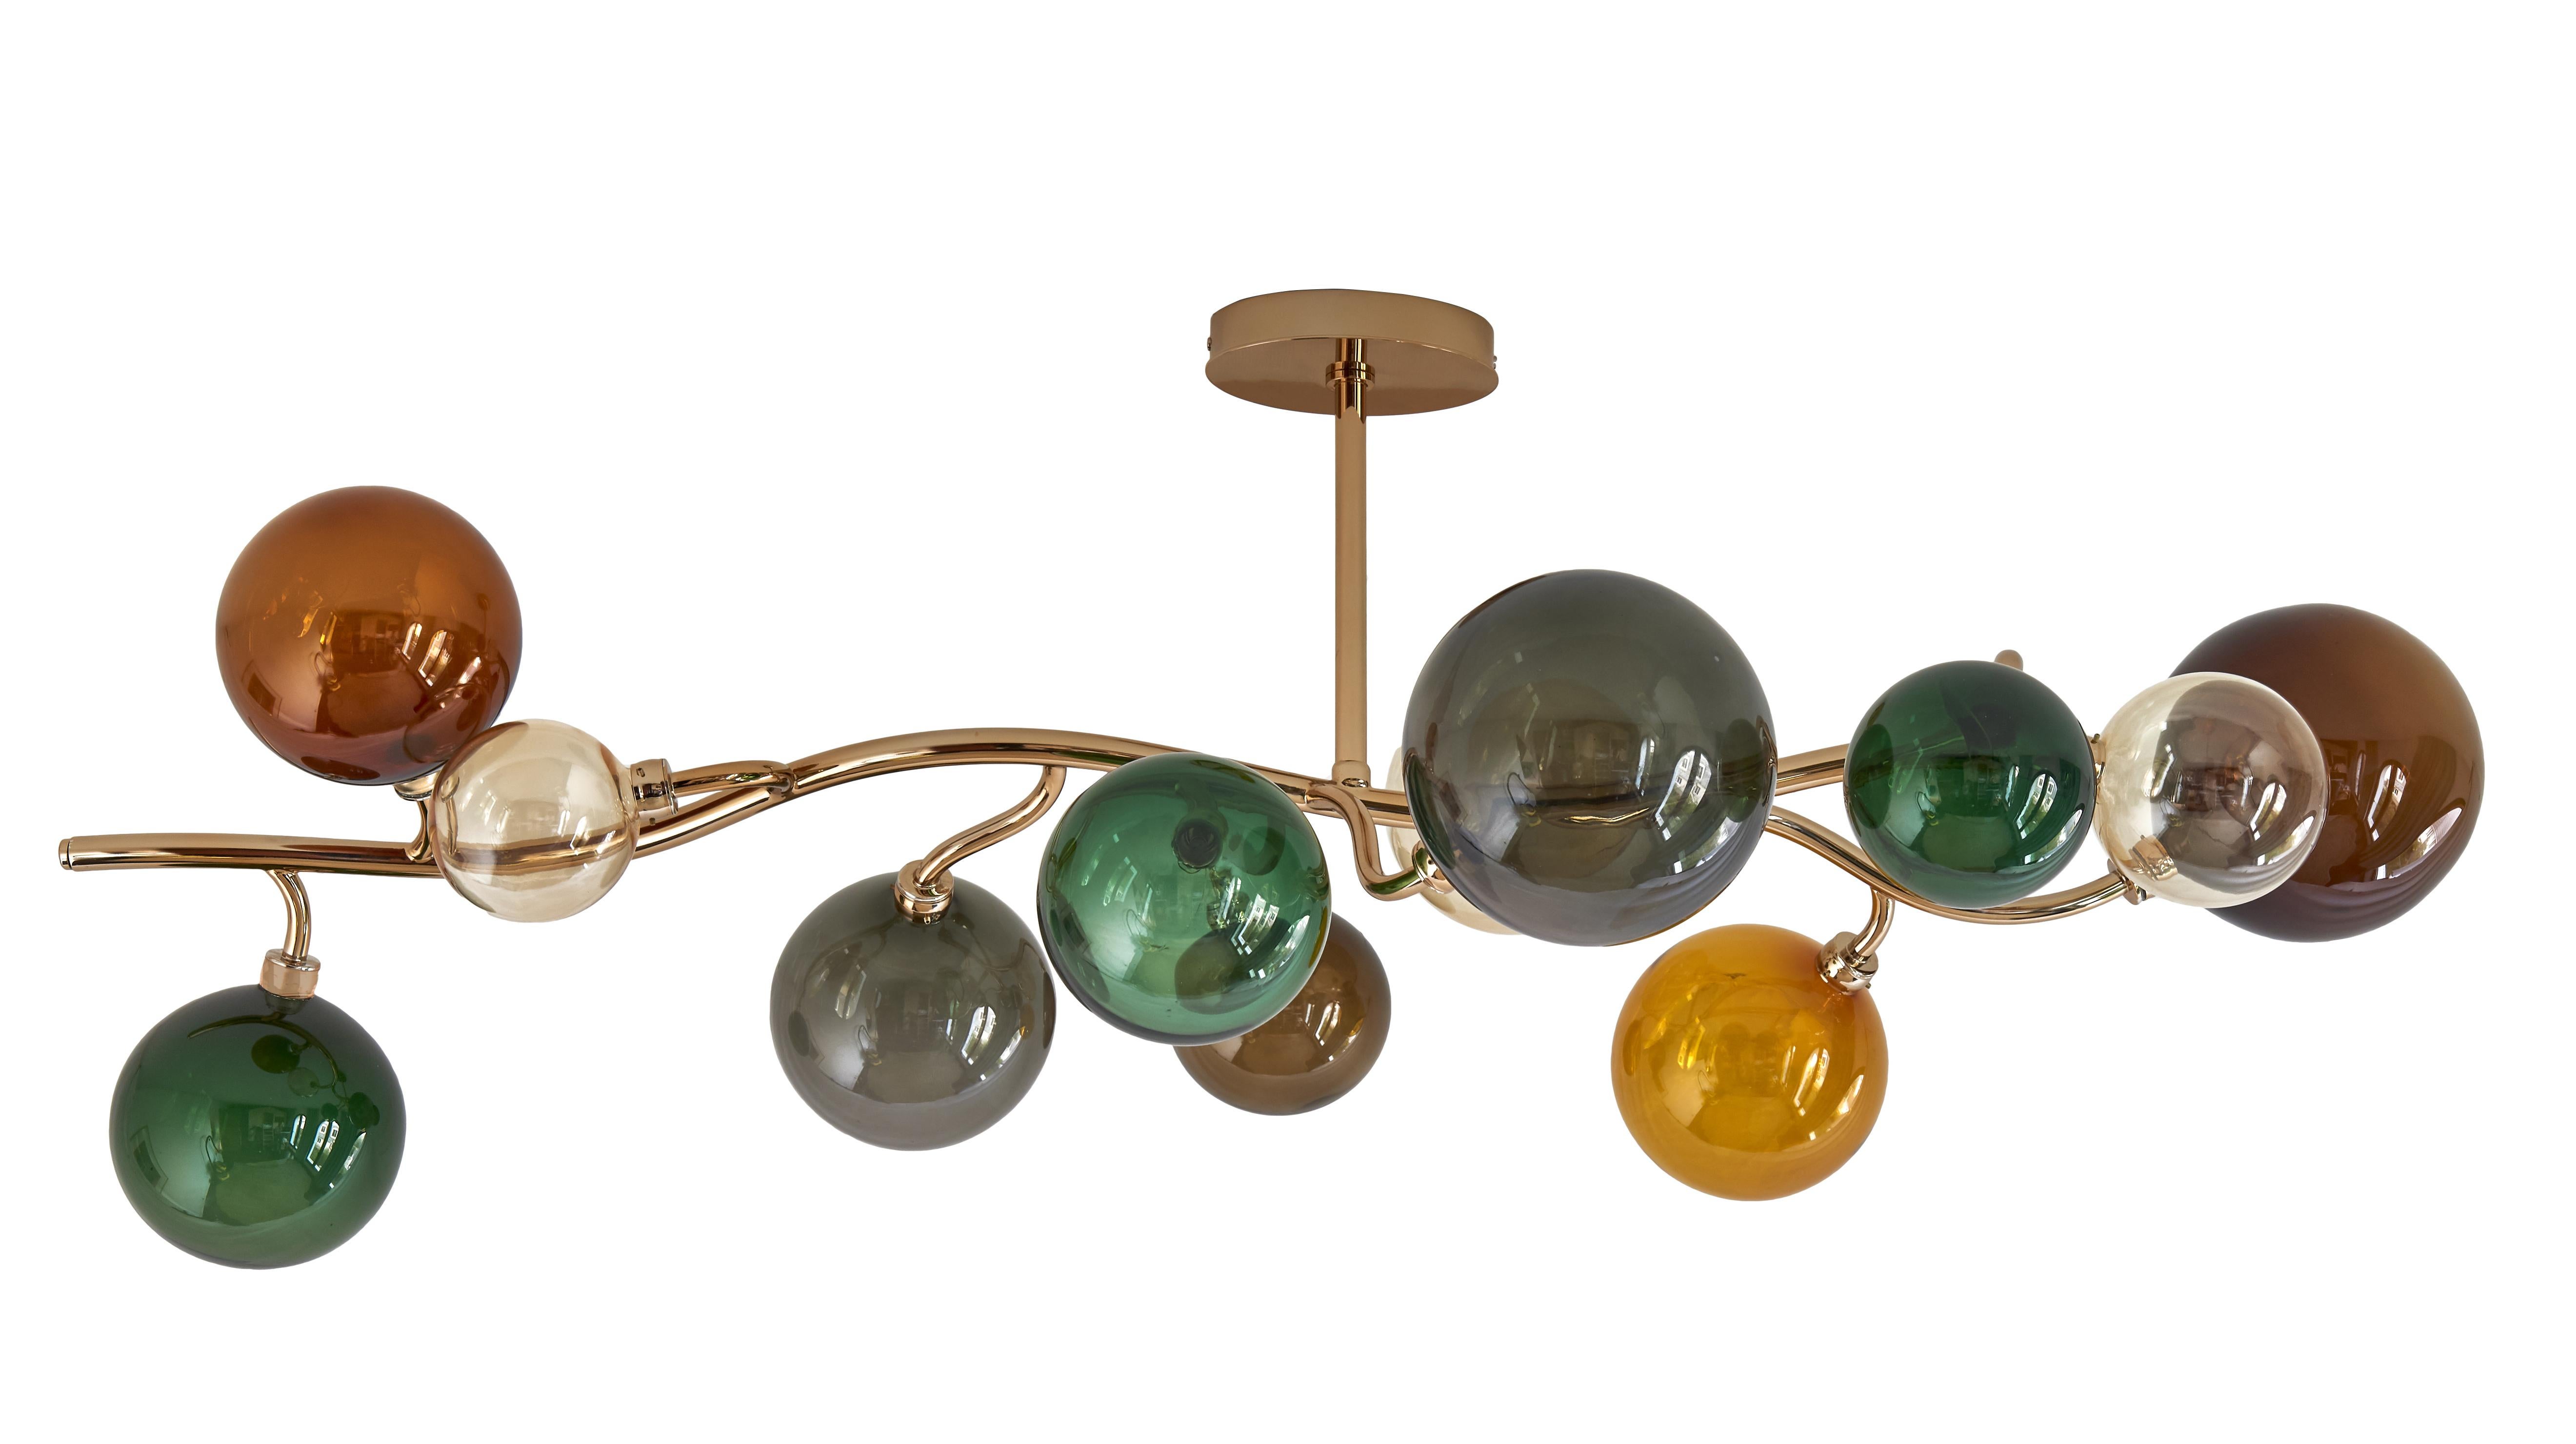 Dionysos Chandelier by Emilie Lemardeley
Handmade in France, 21st century
Metal Finish: gold plate on a brass structure. Hand-blown glass spheres. 
Glass colors: smoked grey, dark green, light and dark amber, champagne.

Length: 47.24